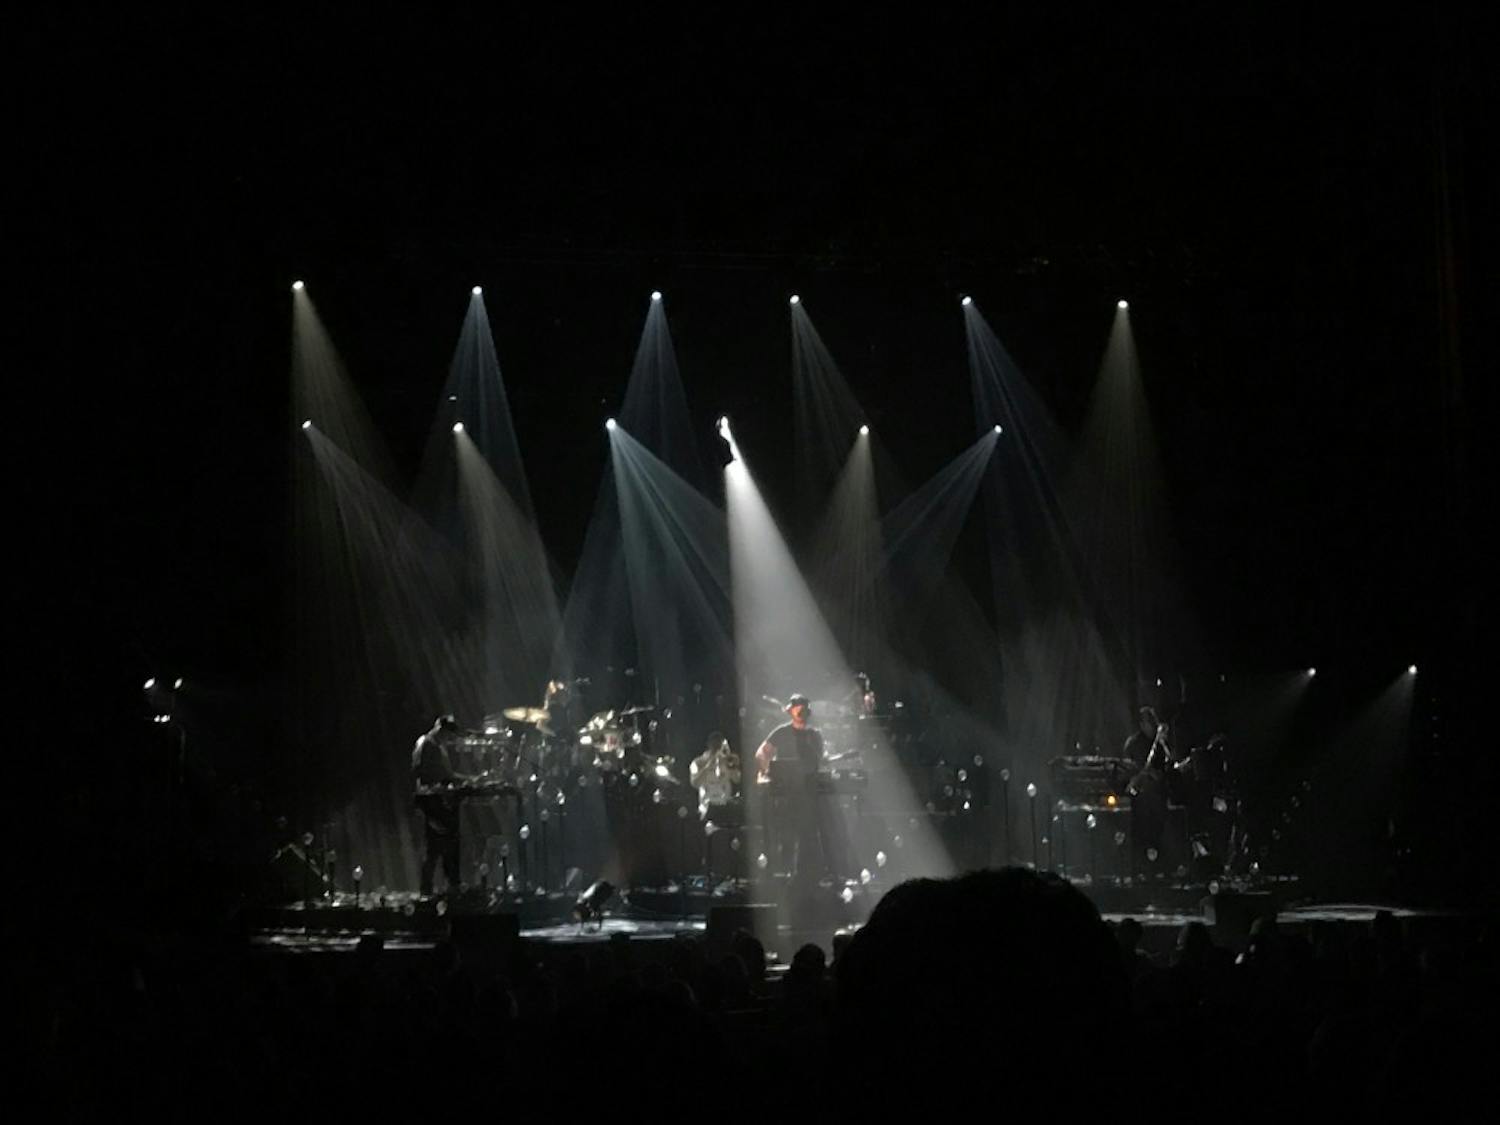 Bon Iver had two performances at DPAC.